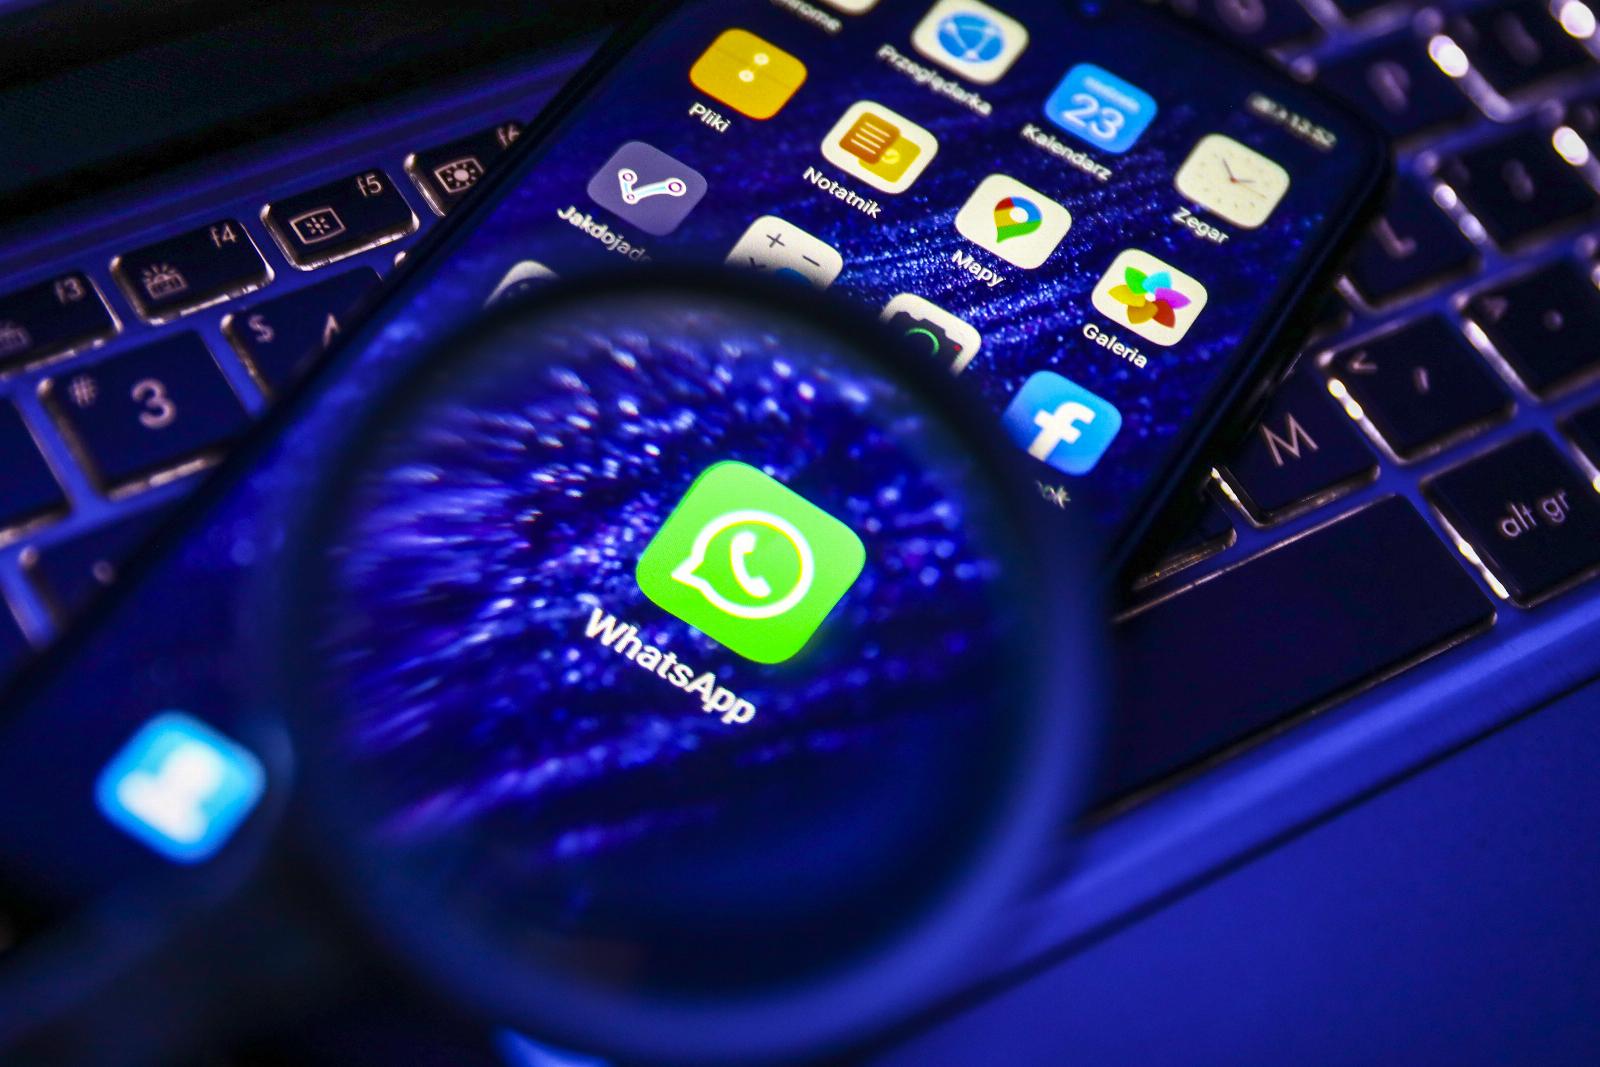 WhatsApp’s multi-device feature now supports more than one phone